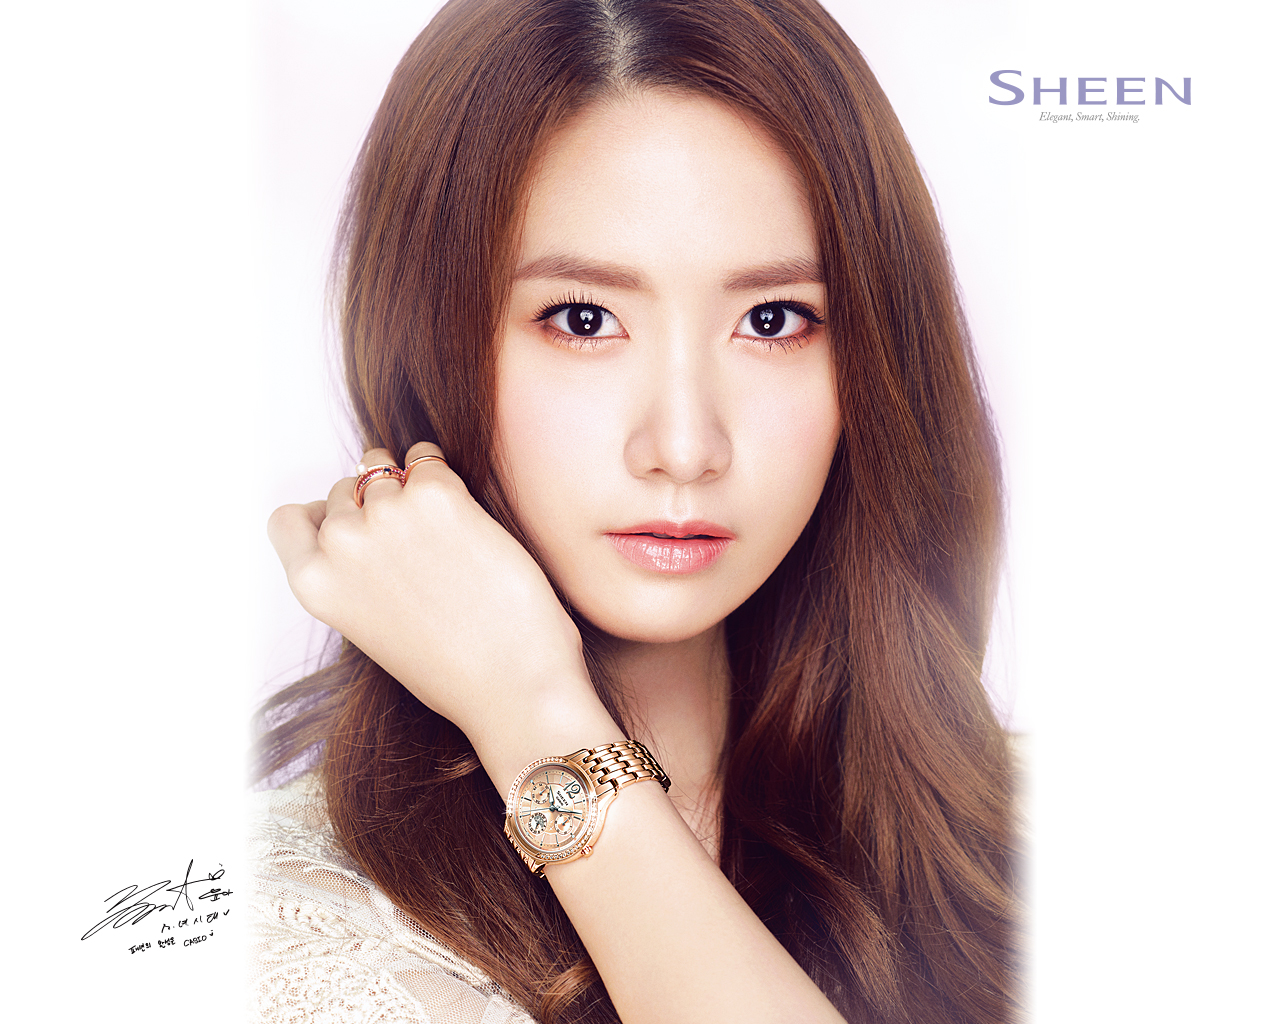 And Yoona Snsd For Casio Sheen Cf Wallpaper Psycho Friend S